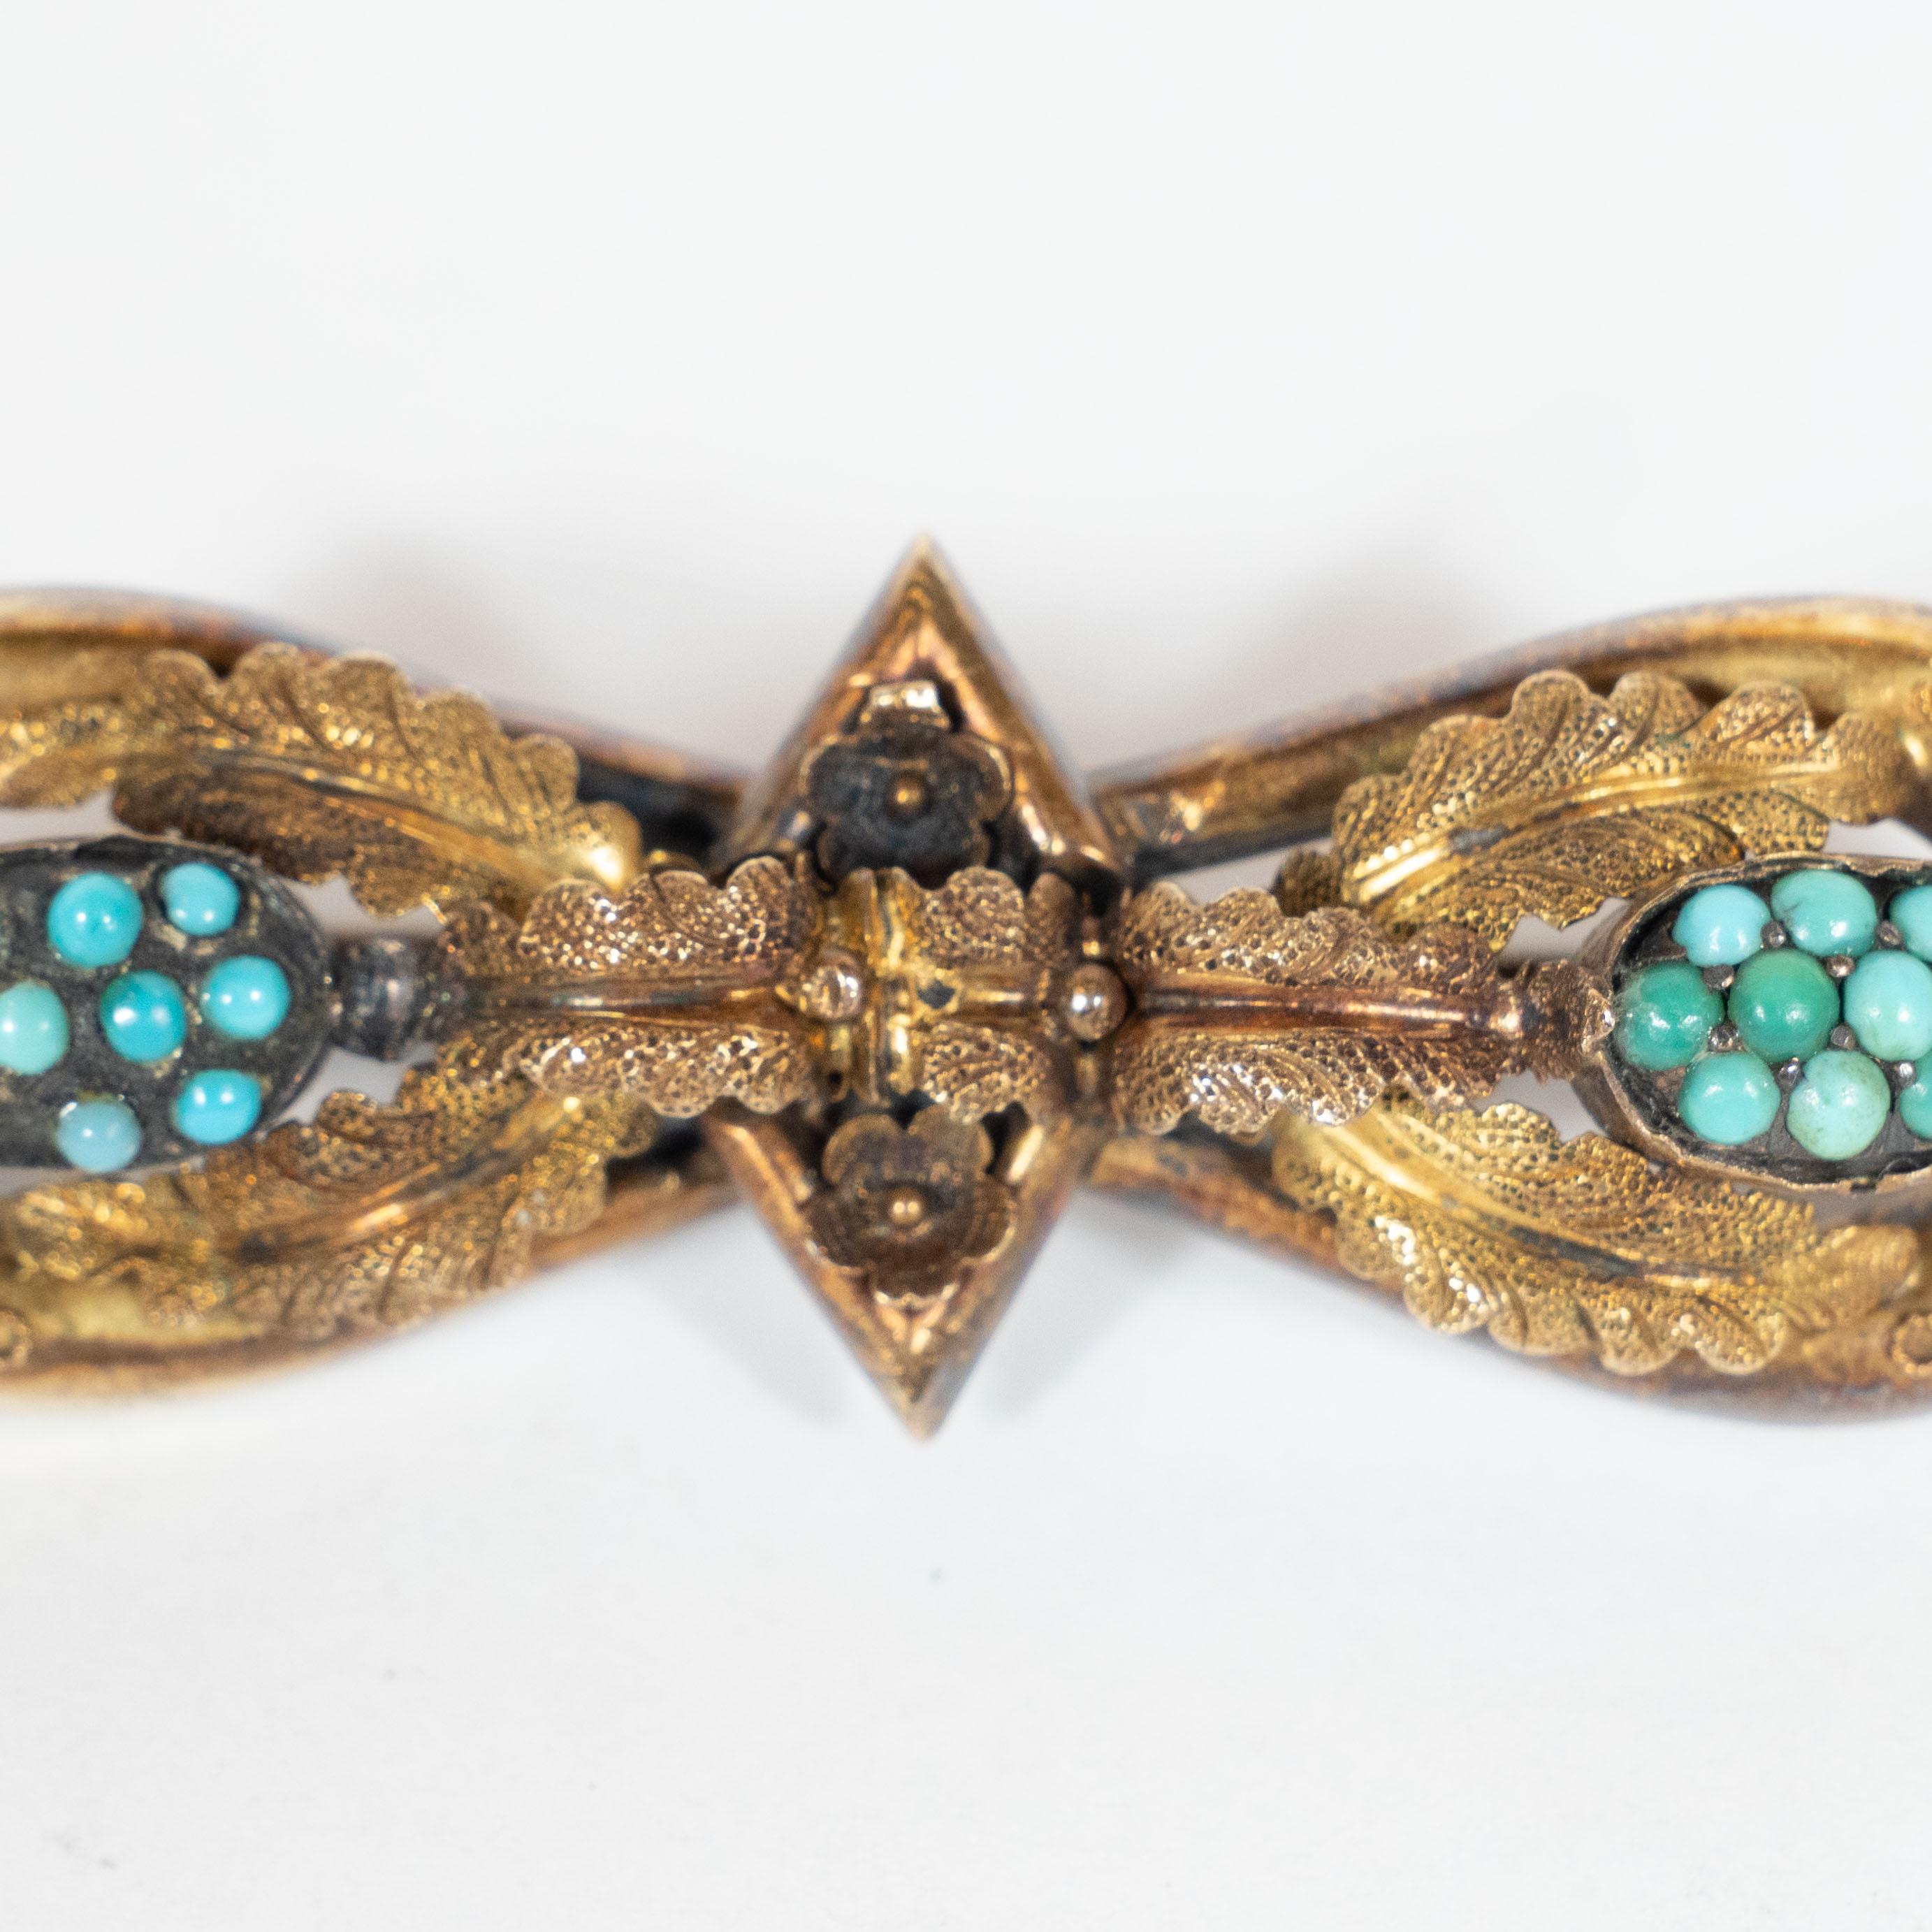 This elegant victorian brooch was realized in the United States, circa 1920. it features two ovoids that together create an hourglass shape that meet in the center at a diamond form. A collection of circular turquoise stones sit in in the center of